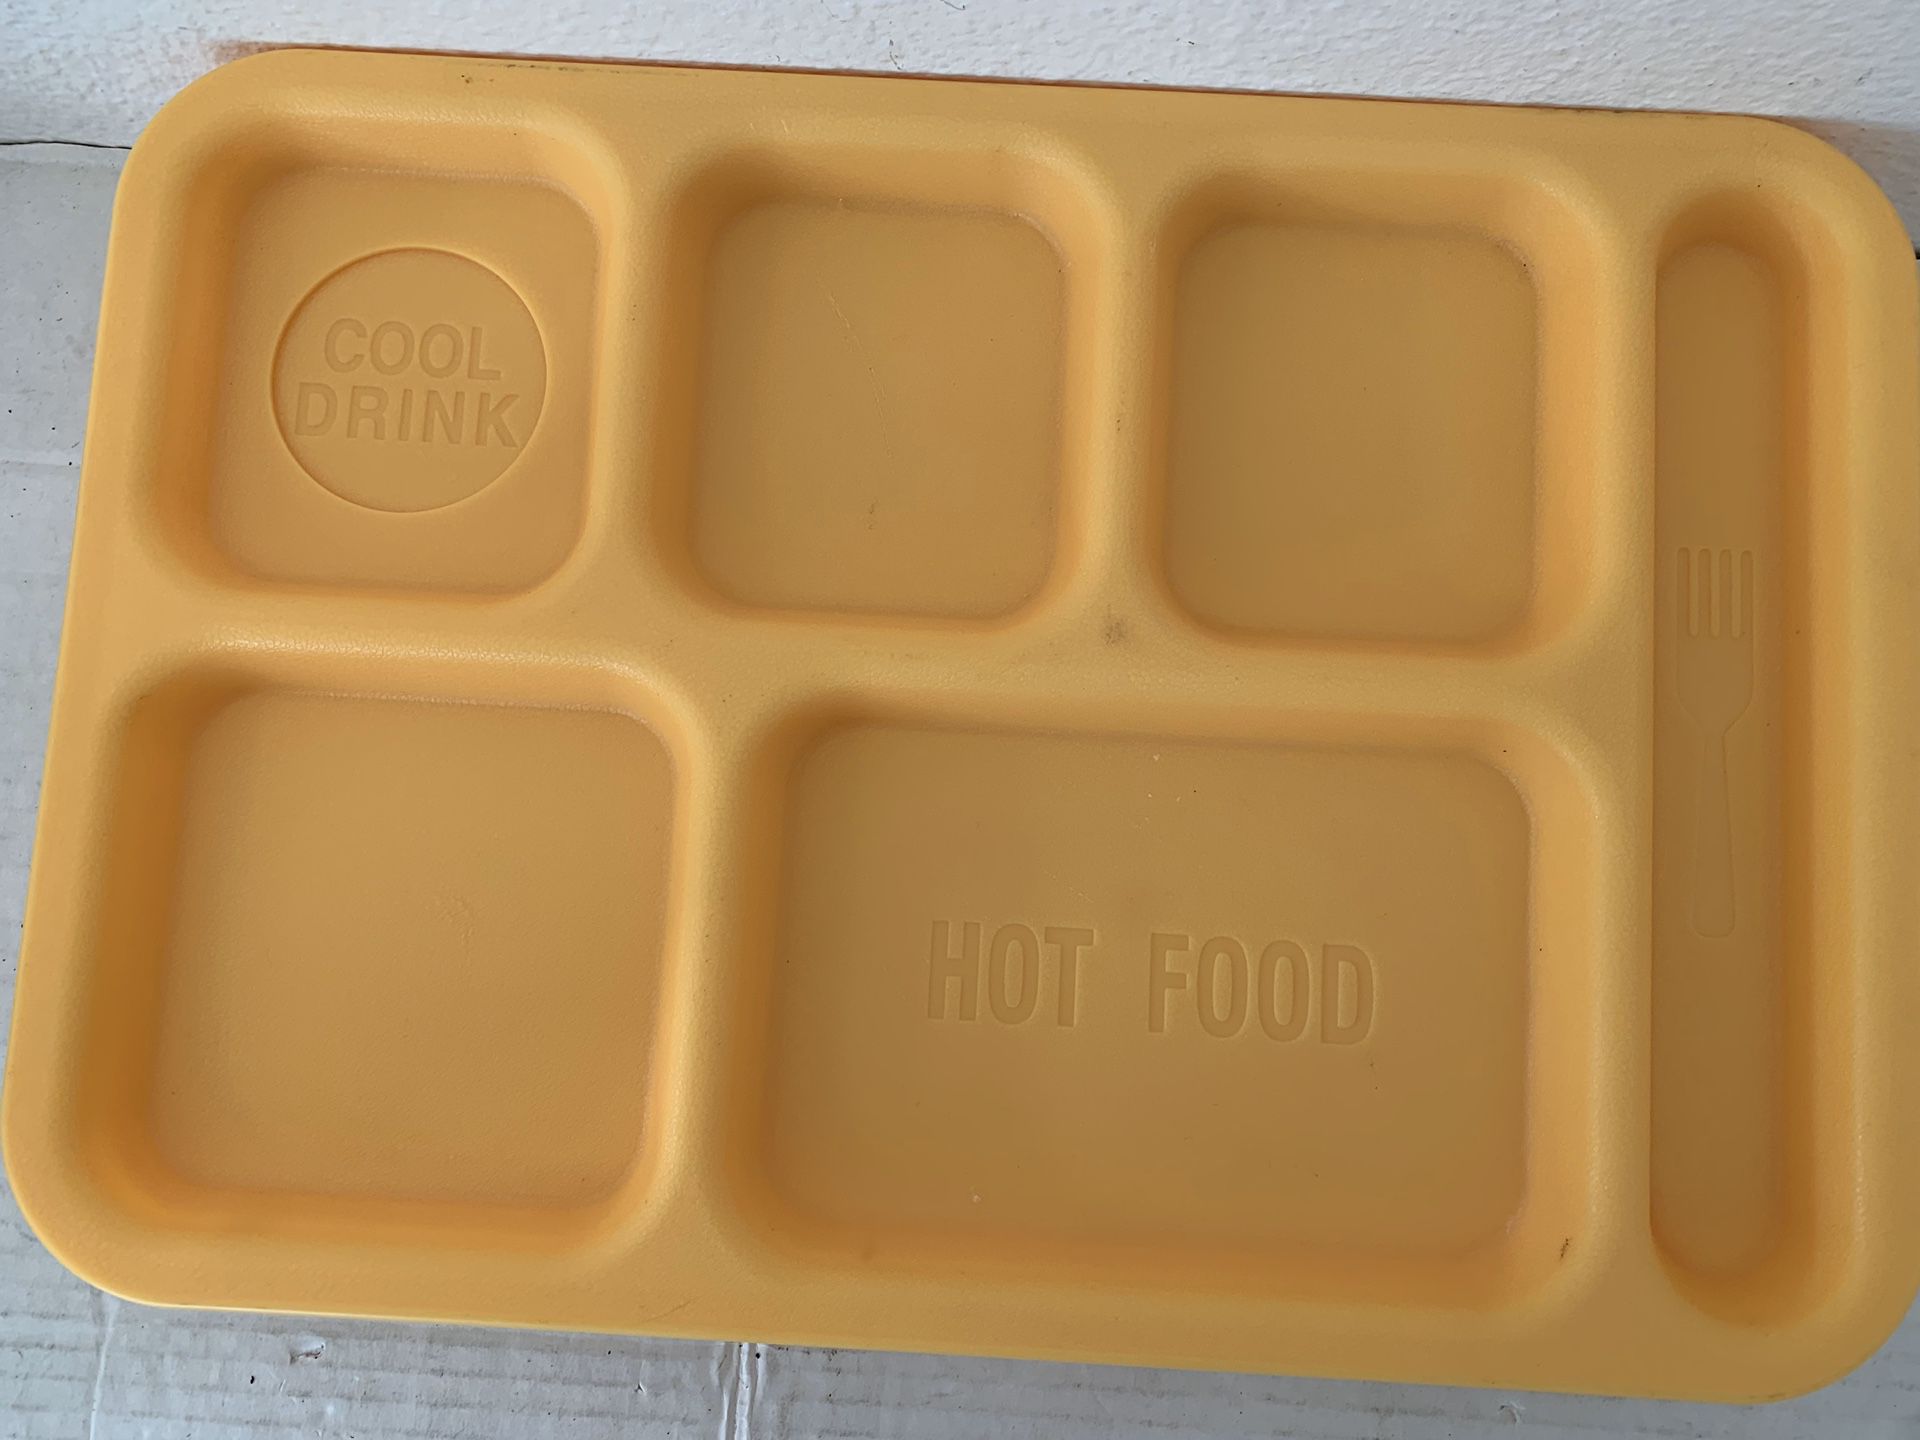 5 Yellow Lunch Cafeteria Trays 6-Compartments Hot Food Cold Drink Area Retro